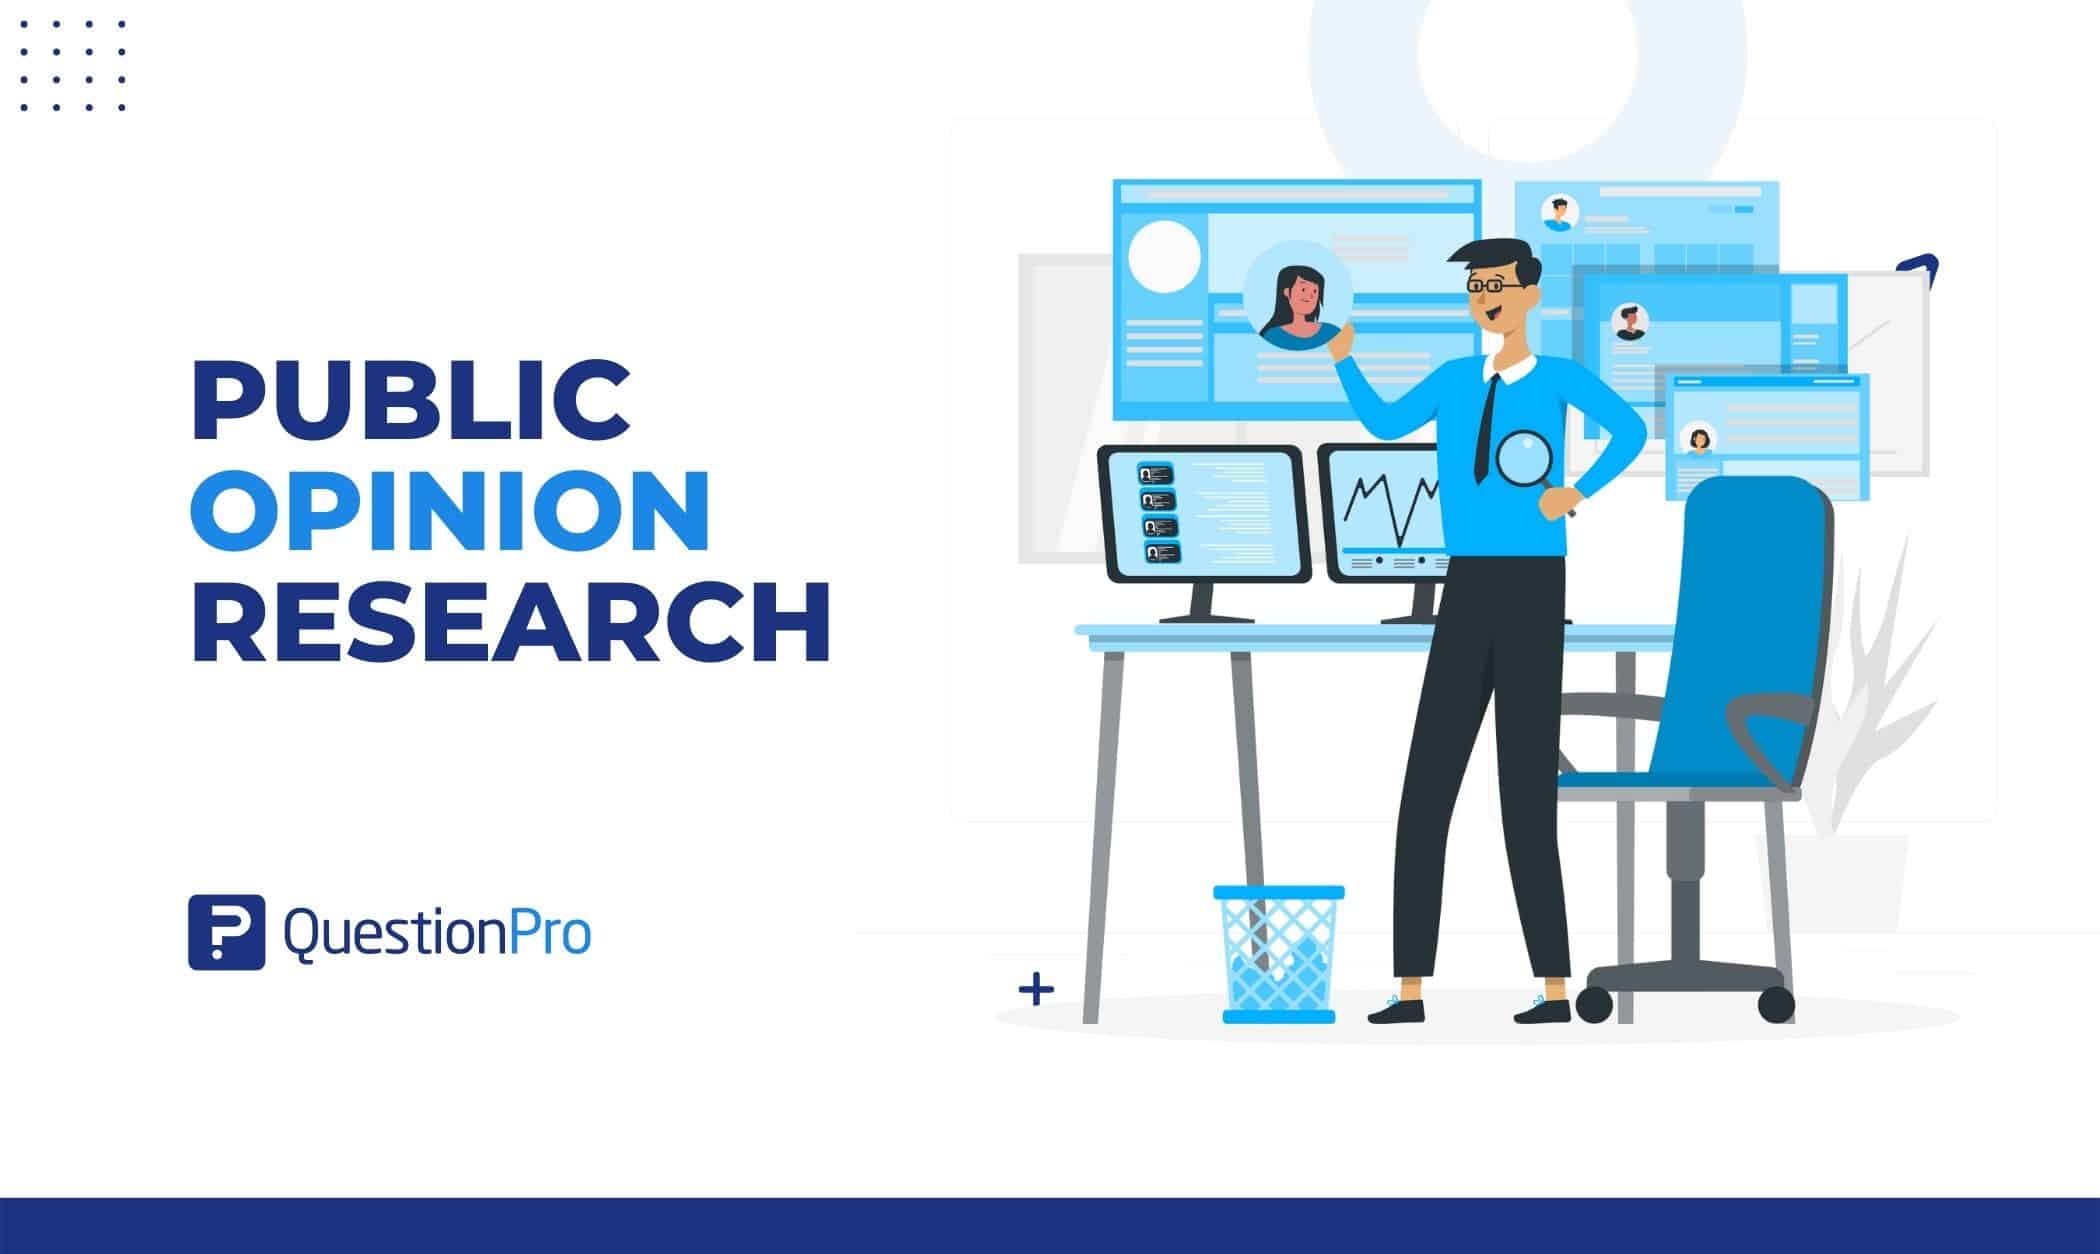 Public opinion research is vital because it identifies organizational and service difficulties. This blog briefly reviews its significance.